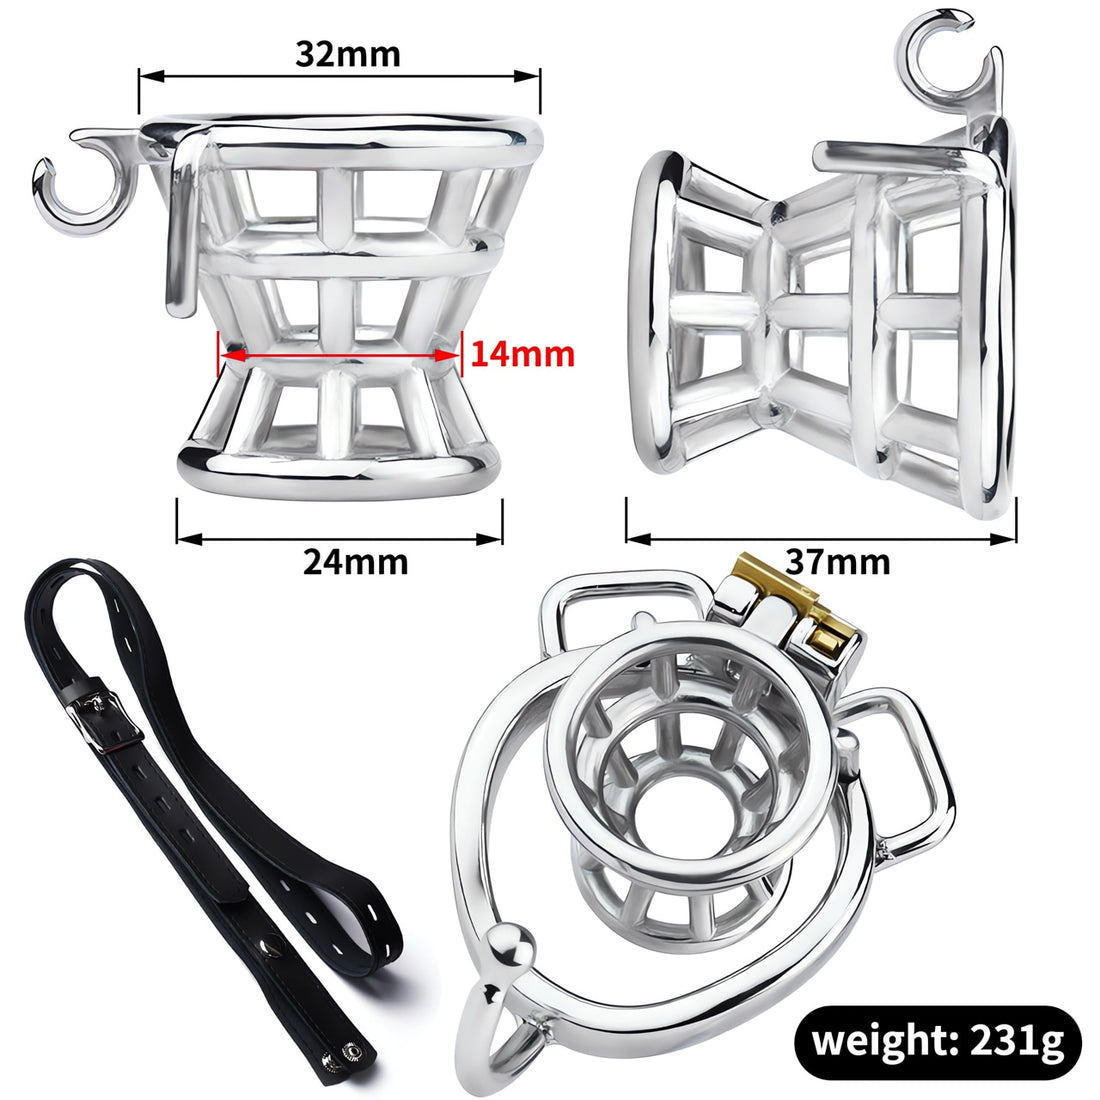 Comfortable Strap On Belt Reverse Innie Cage Lock The Cock Cage Product For Sale Image 4